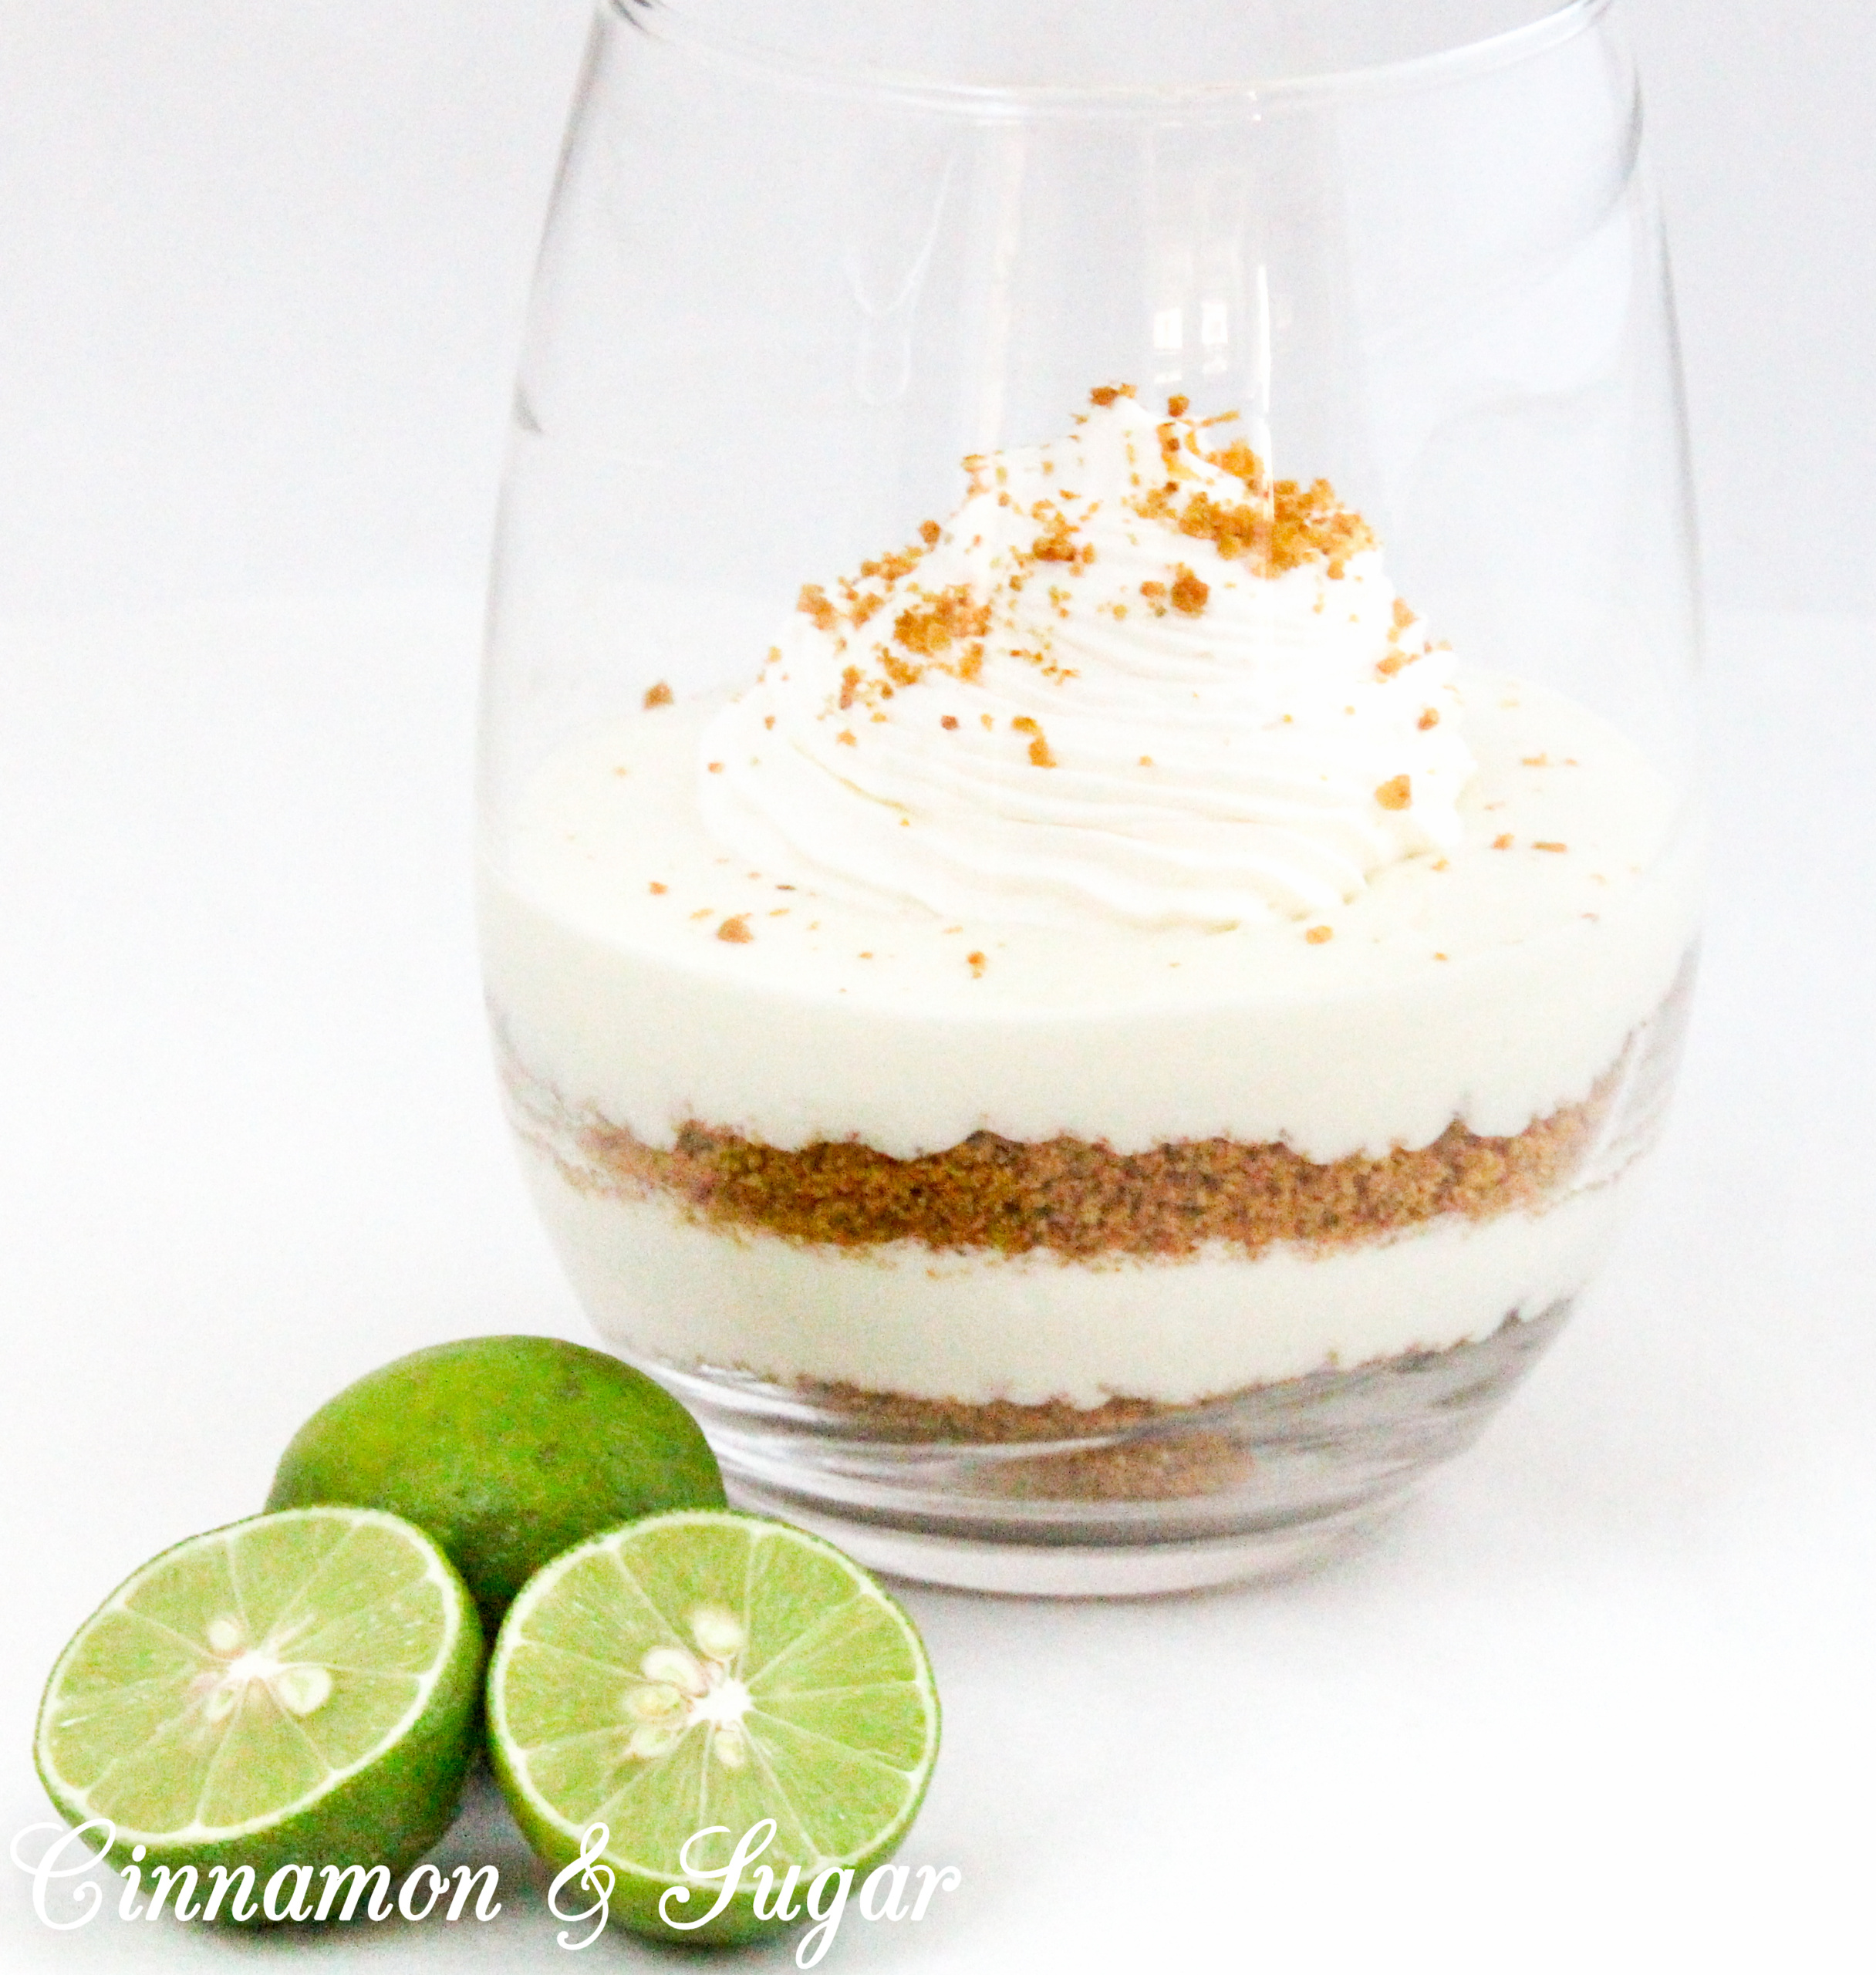 Key Lime Parfait combines tart citrus key limes with creamy whipped cream. Layered with crunchy, sweet graham cracker crumbs this dessert makes for an elegant presentation. Recipe shared with permission granted by Lucy Burdette, author of THE KEY LIME CRIME.